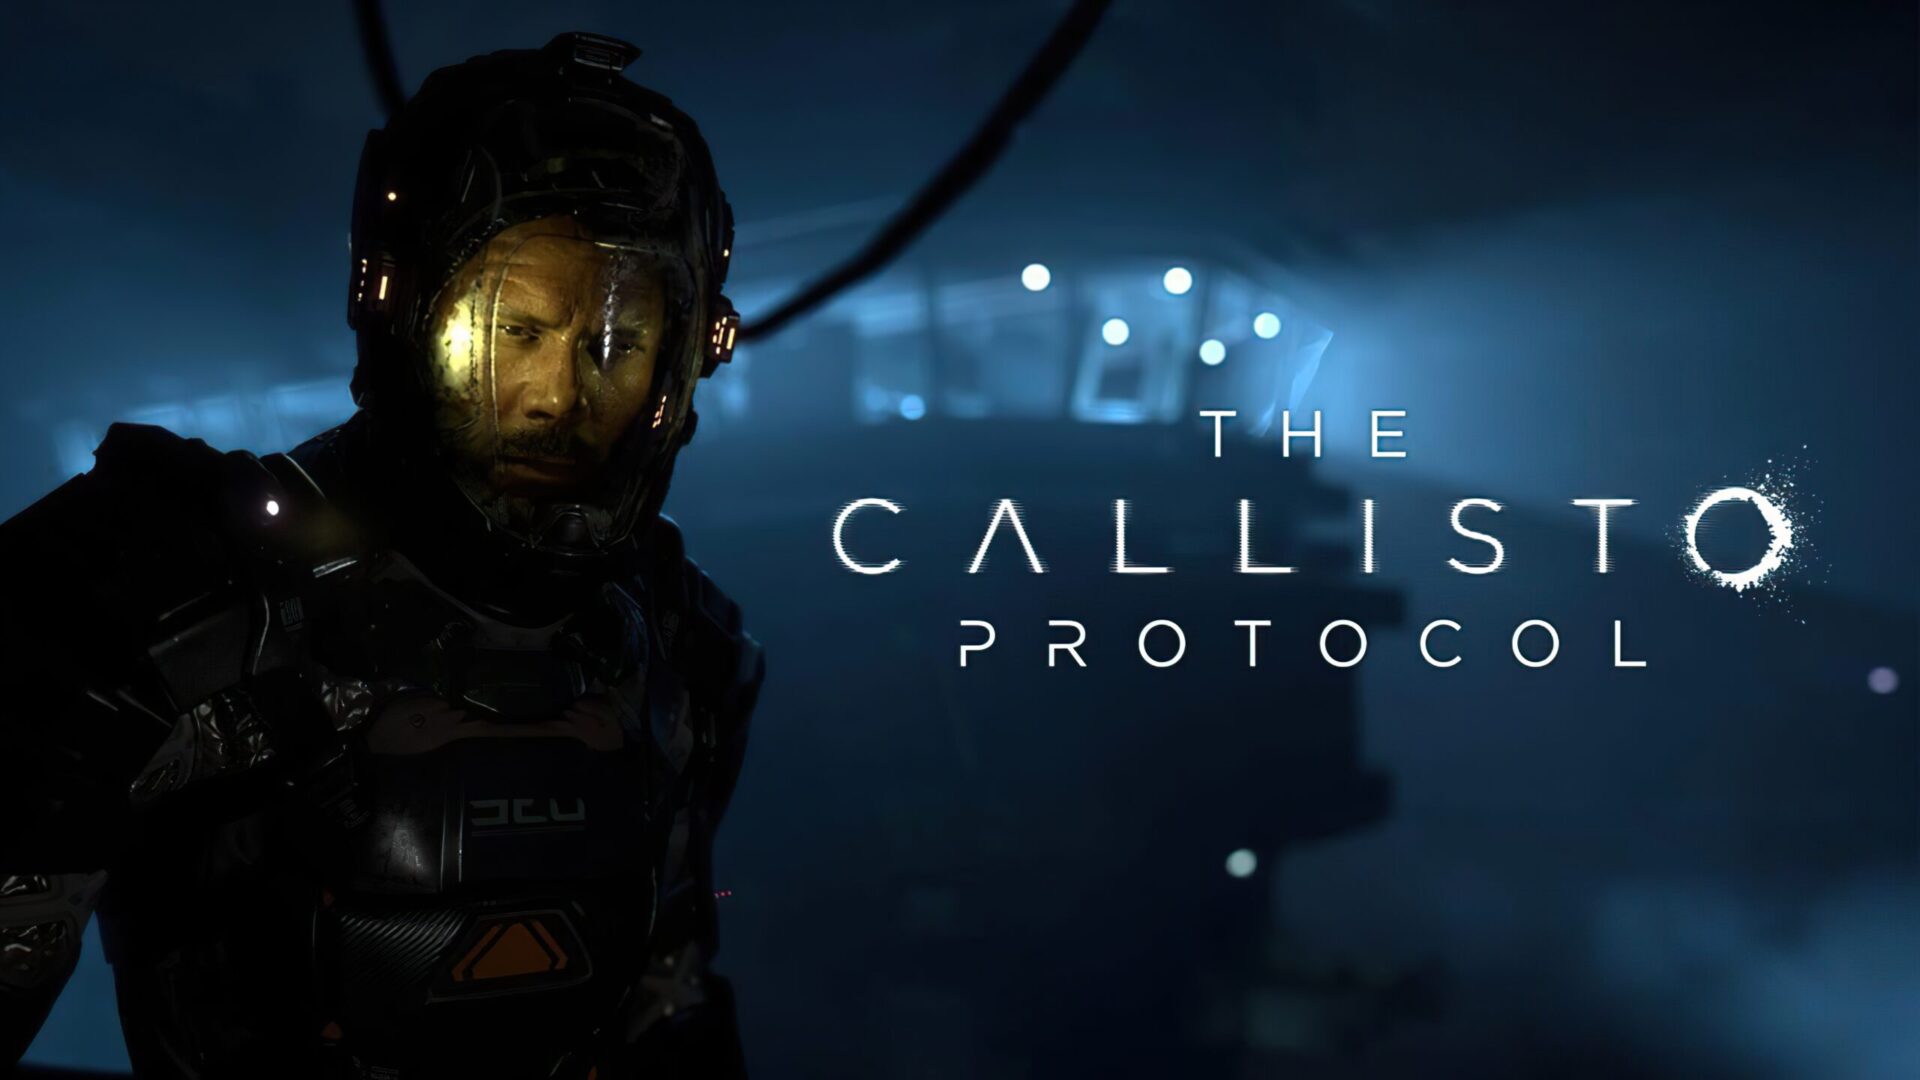 The Callisto Protocol Full Gameplay Leaked on Twitch - EIP Gaming